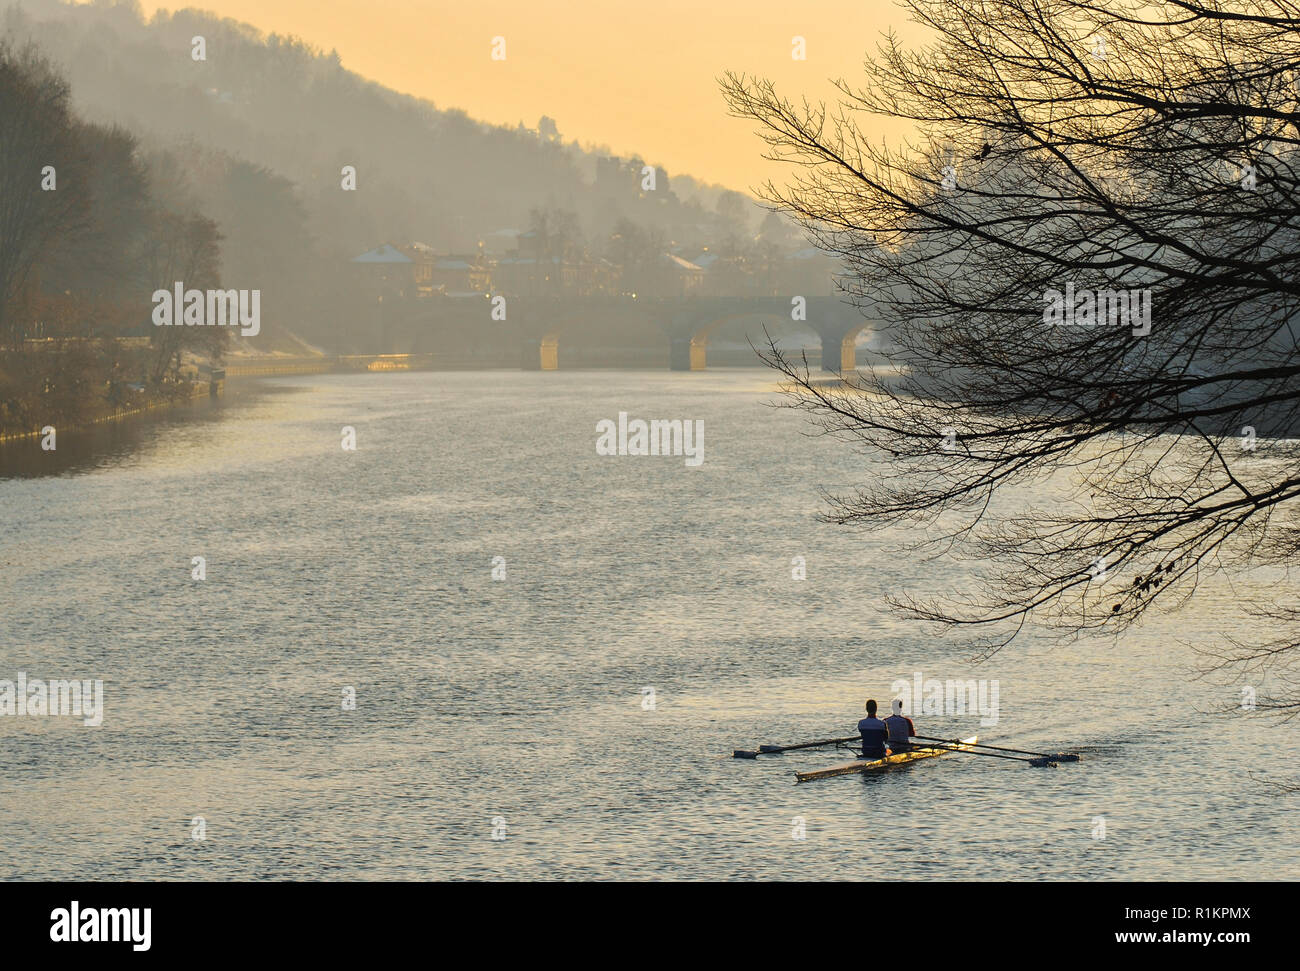 Canoeing on the river, Turin, Italy Stock Photo